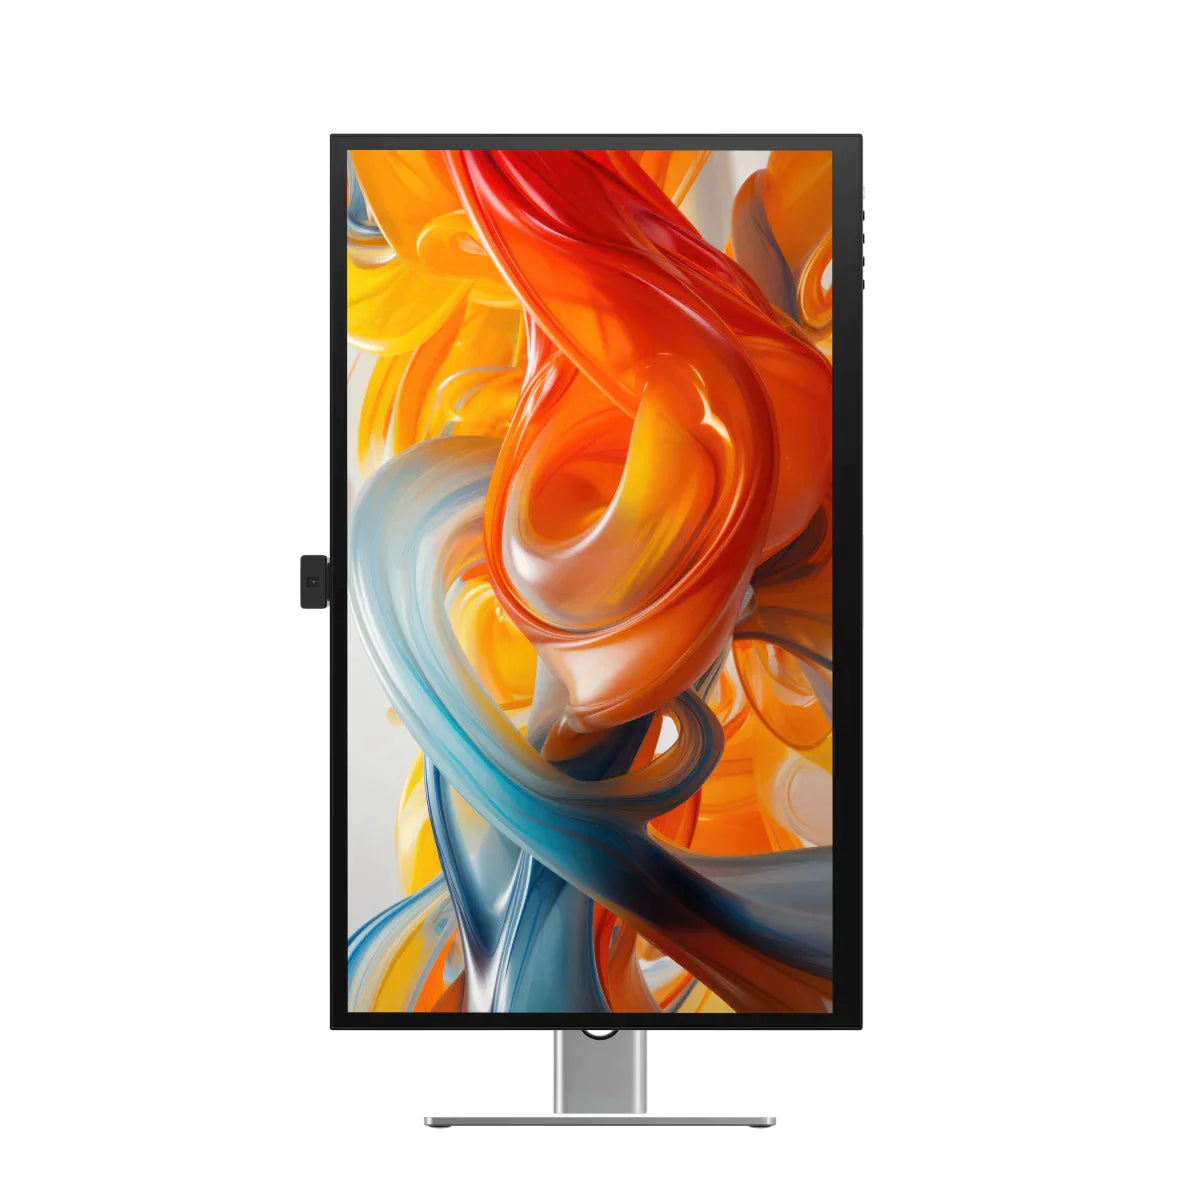 CLARITY 27" UHD 4K Monitor + Clarity Pro Touch 27" UHD 4K Monitor with 65W PD, Webcam and Touchscreen + Dual 4K Universal Docking Station “ HDMI Edition